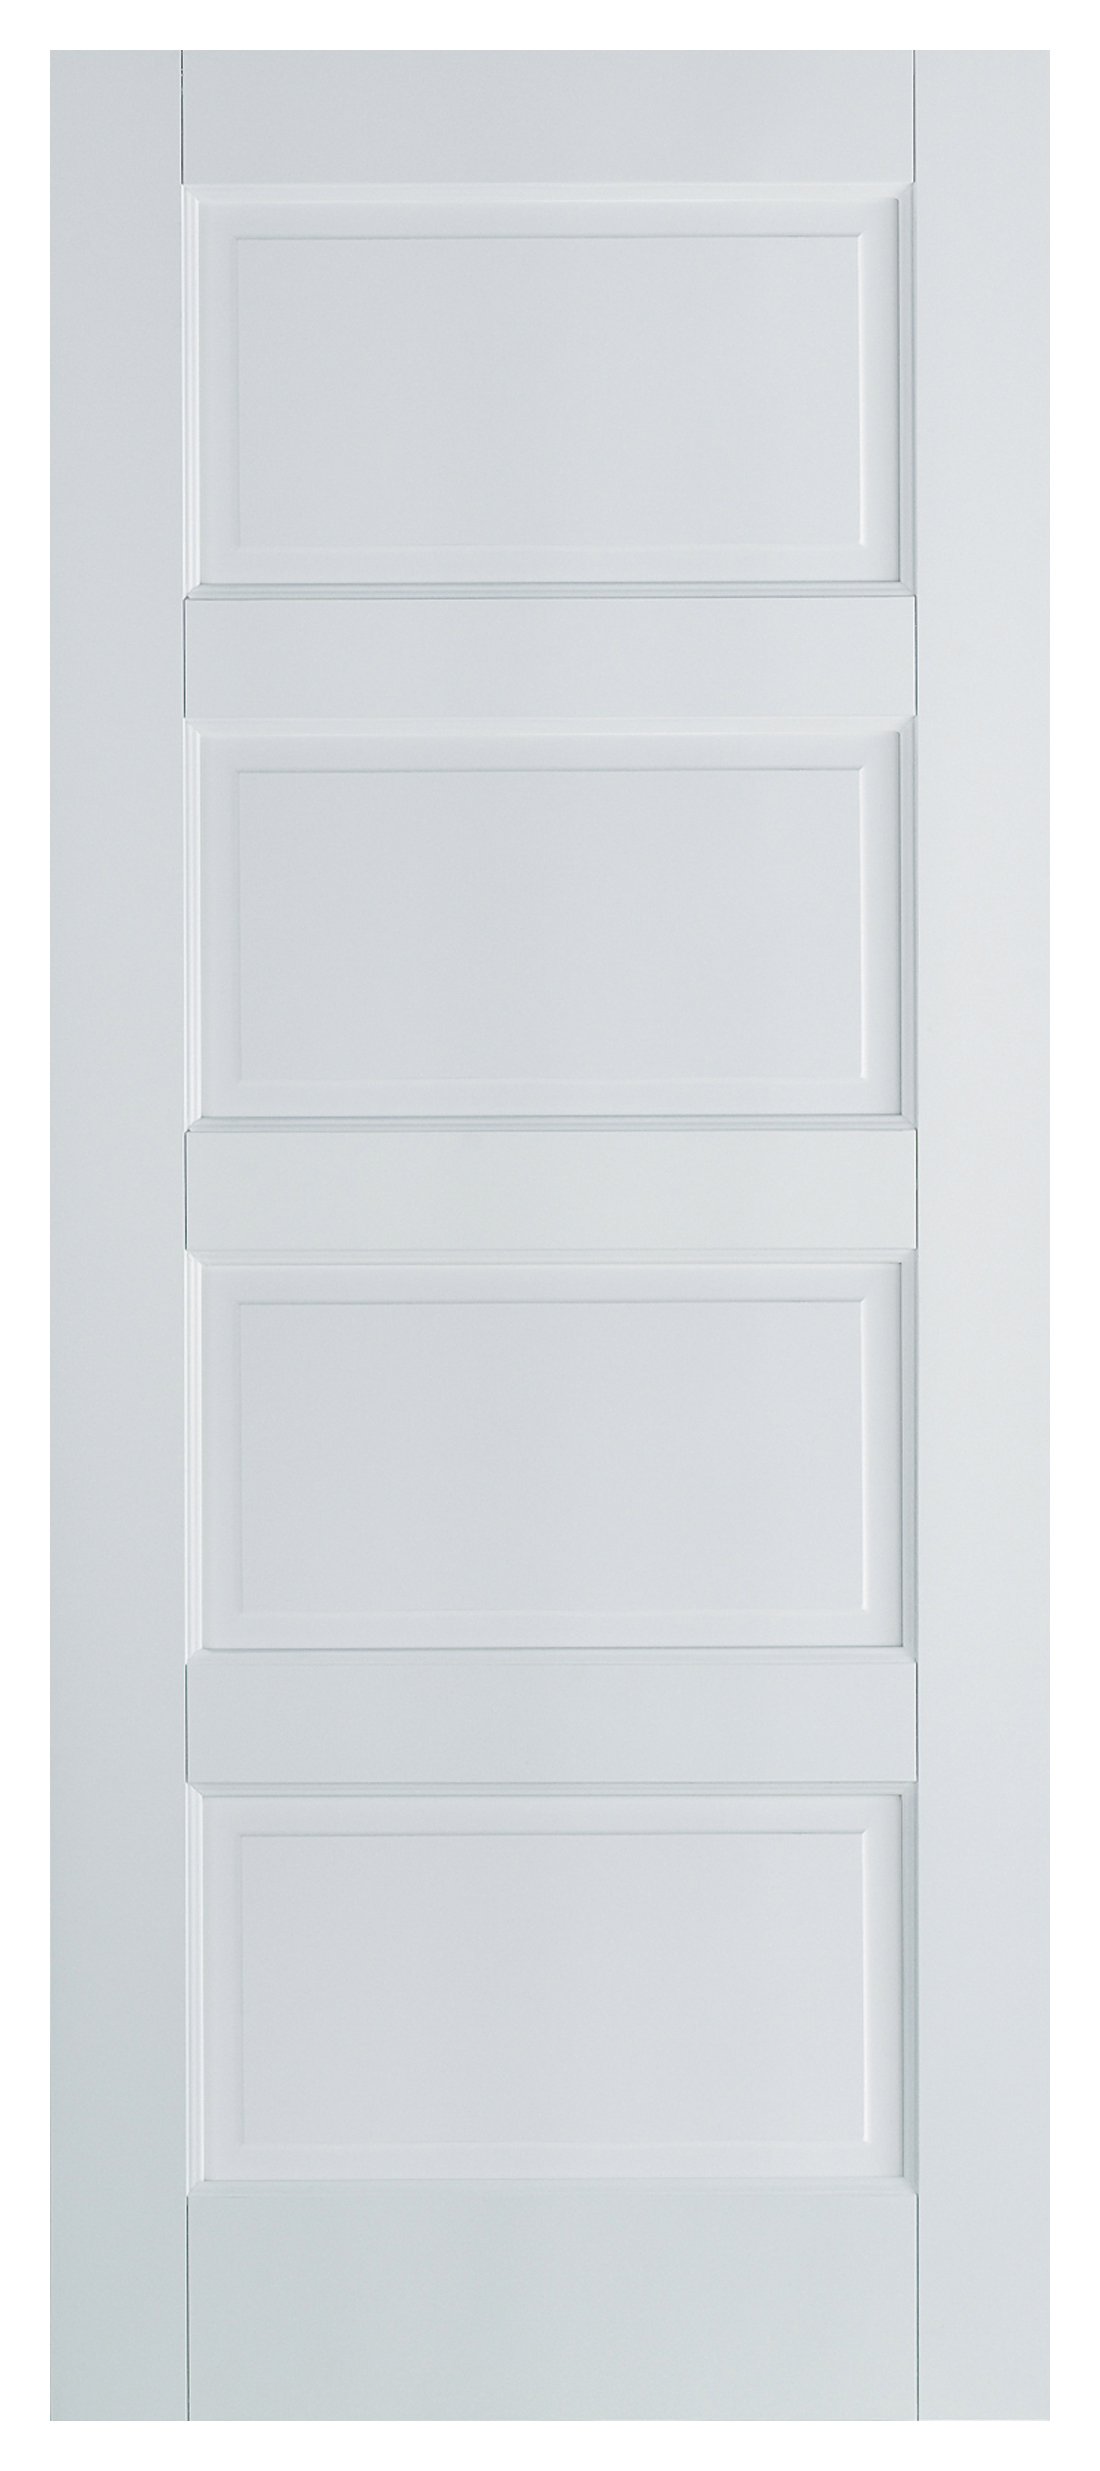 Image of LPD Internal Contemporary 4 Panel Primed White FD30 Fire Door - 838 x 1981mm